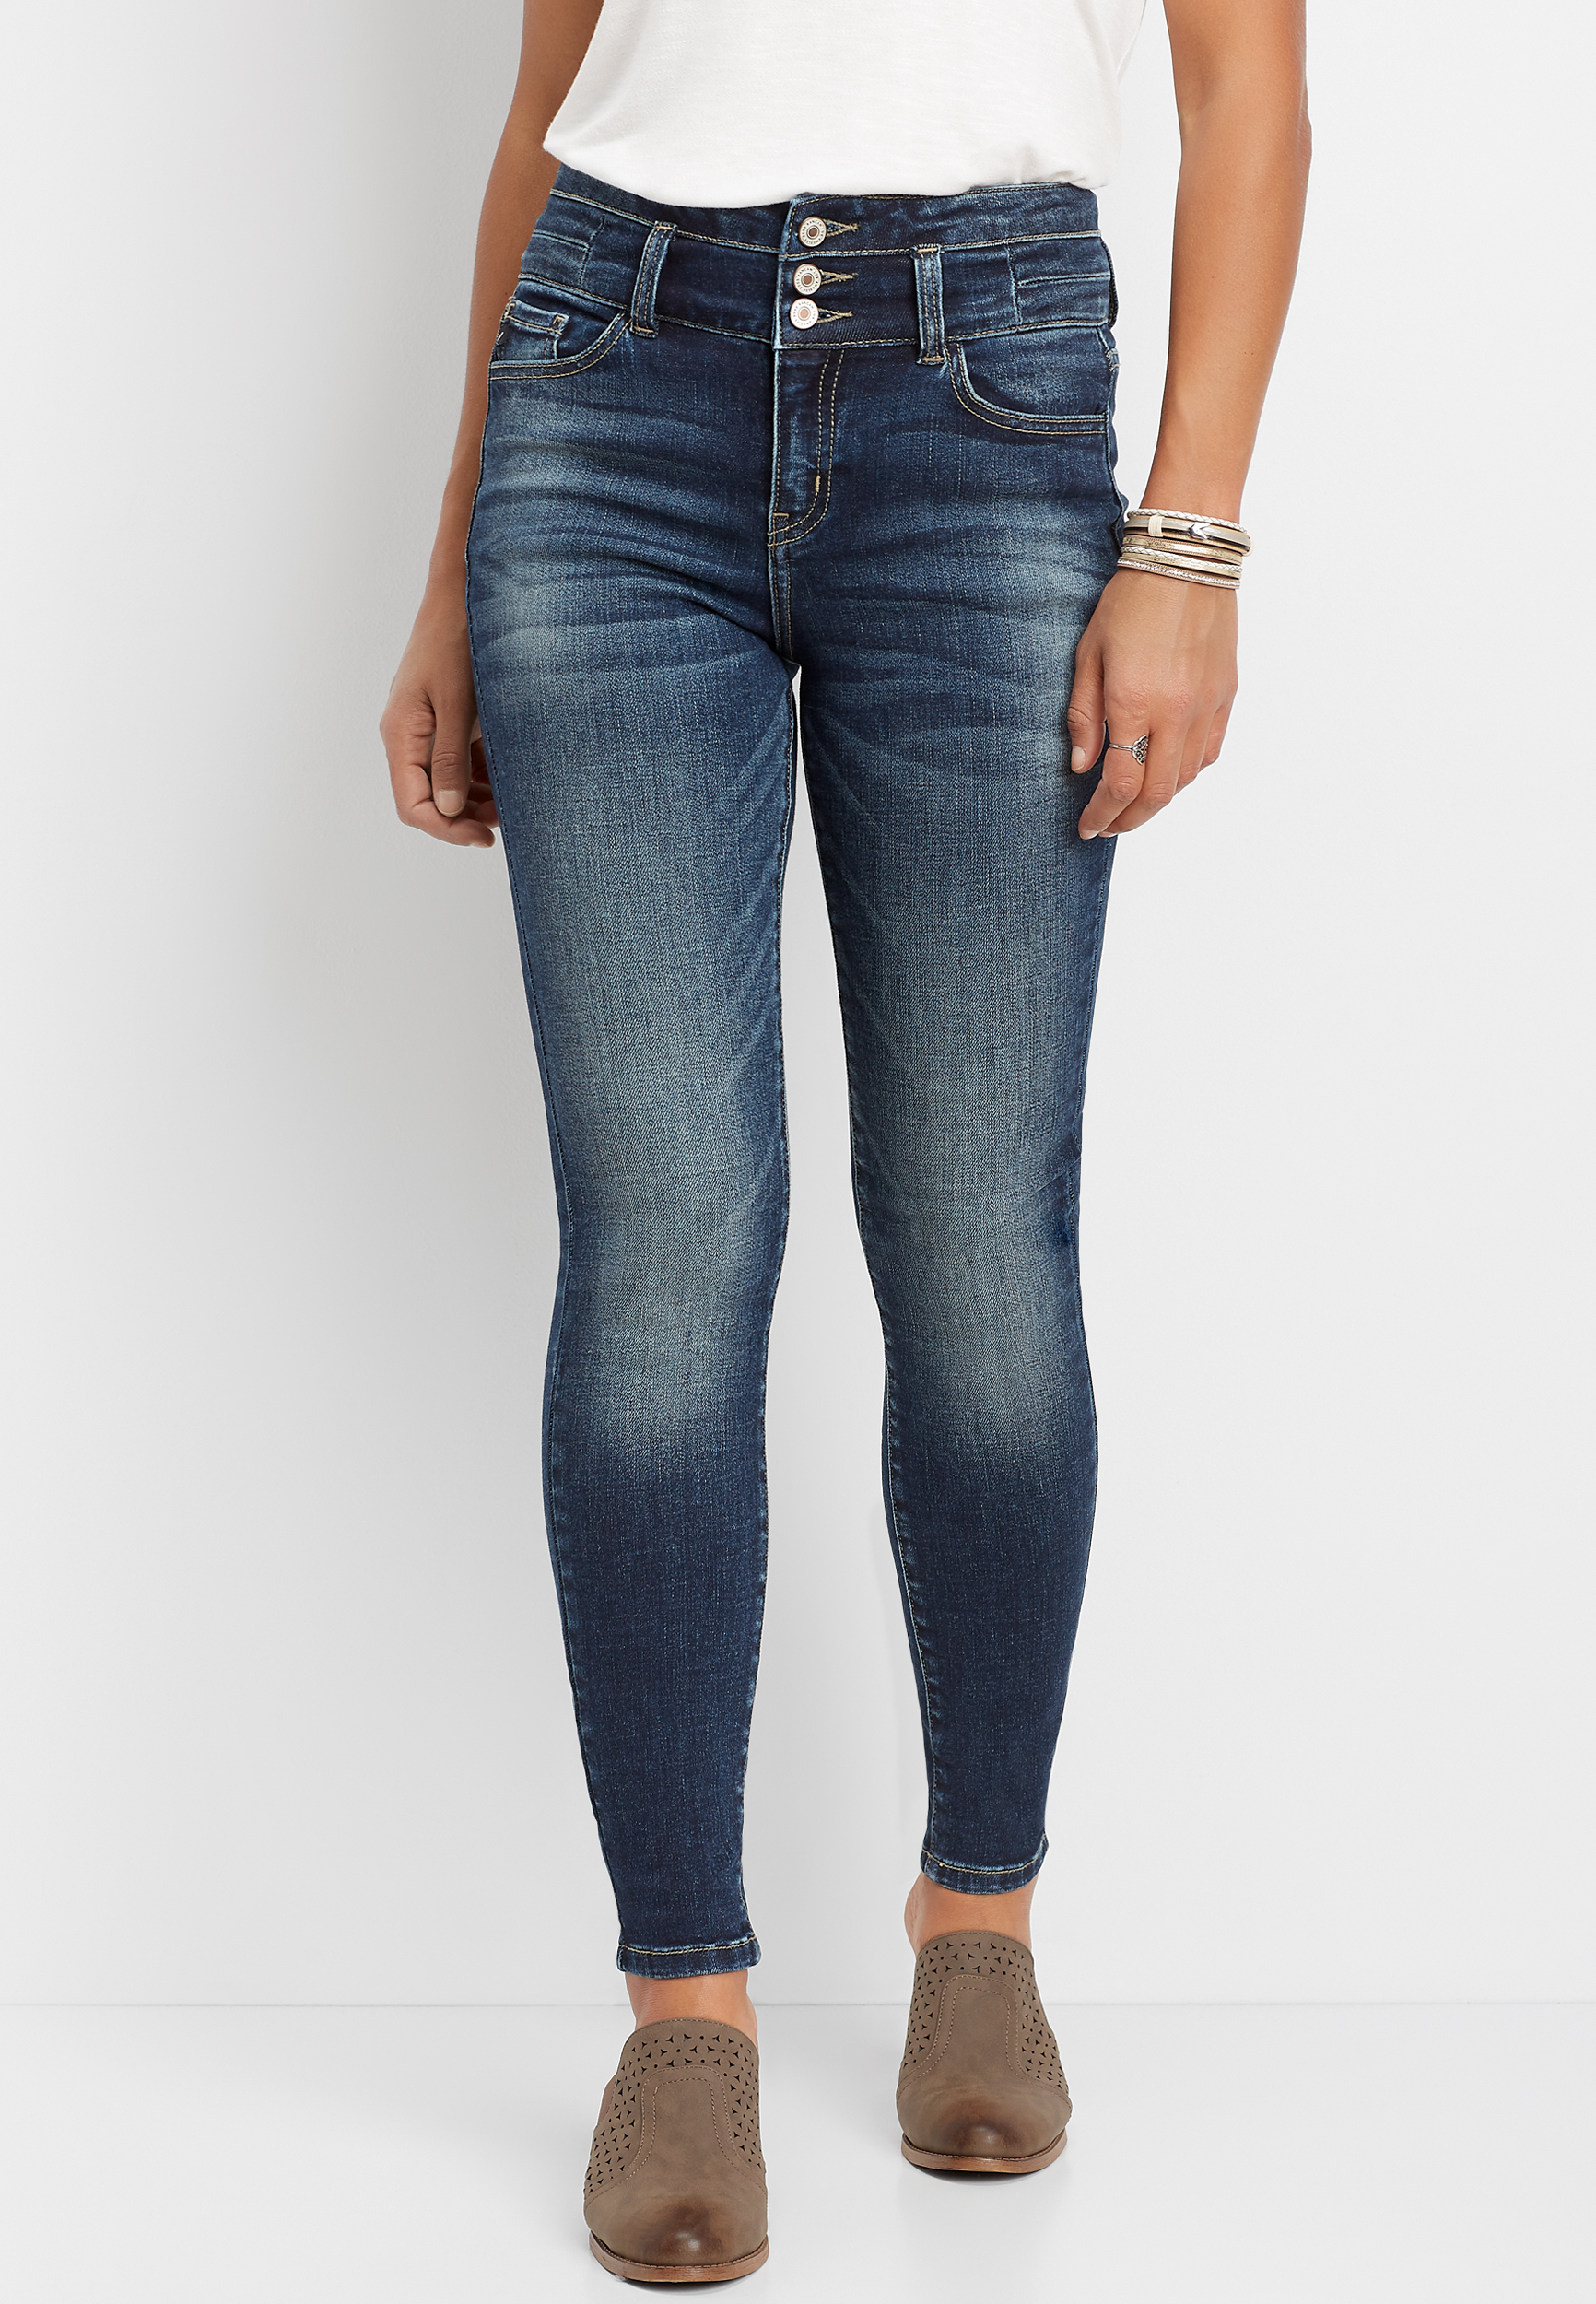 KanCan™ high rise stacked waist skinny jean | maurices